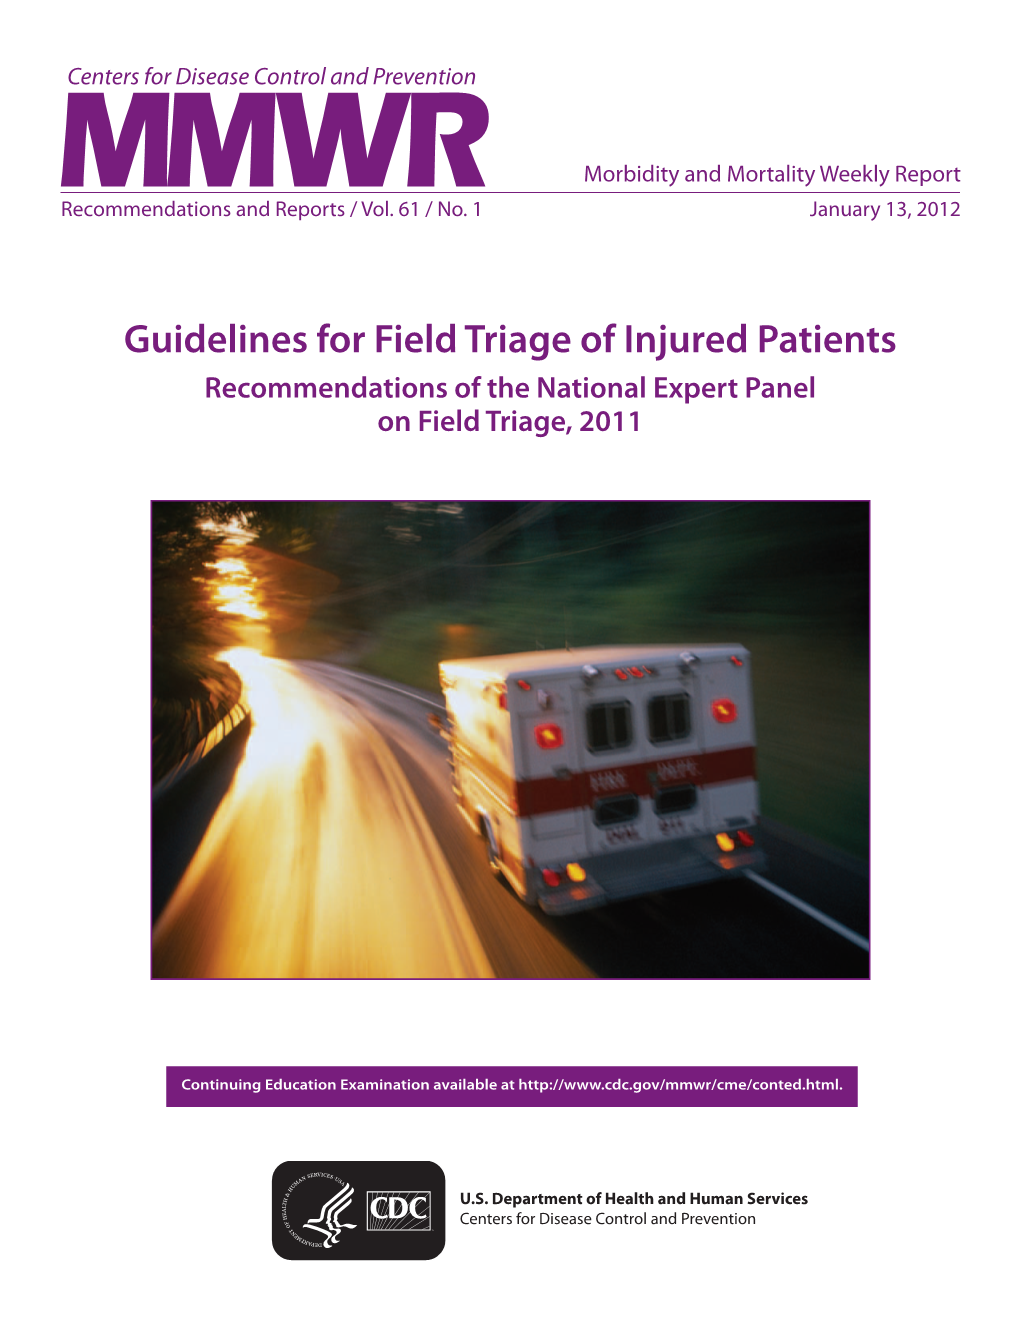 Guidelines for Field Triage of Injured Patients Recommendations of the National Expert Panel on Field Triage, 2011